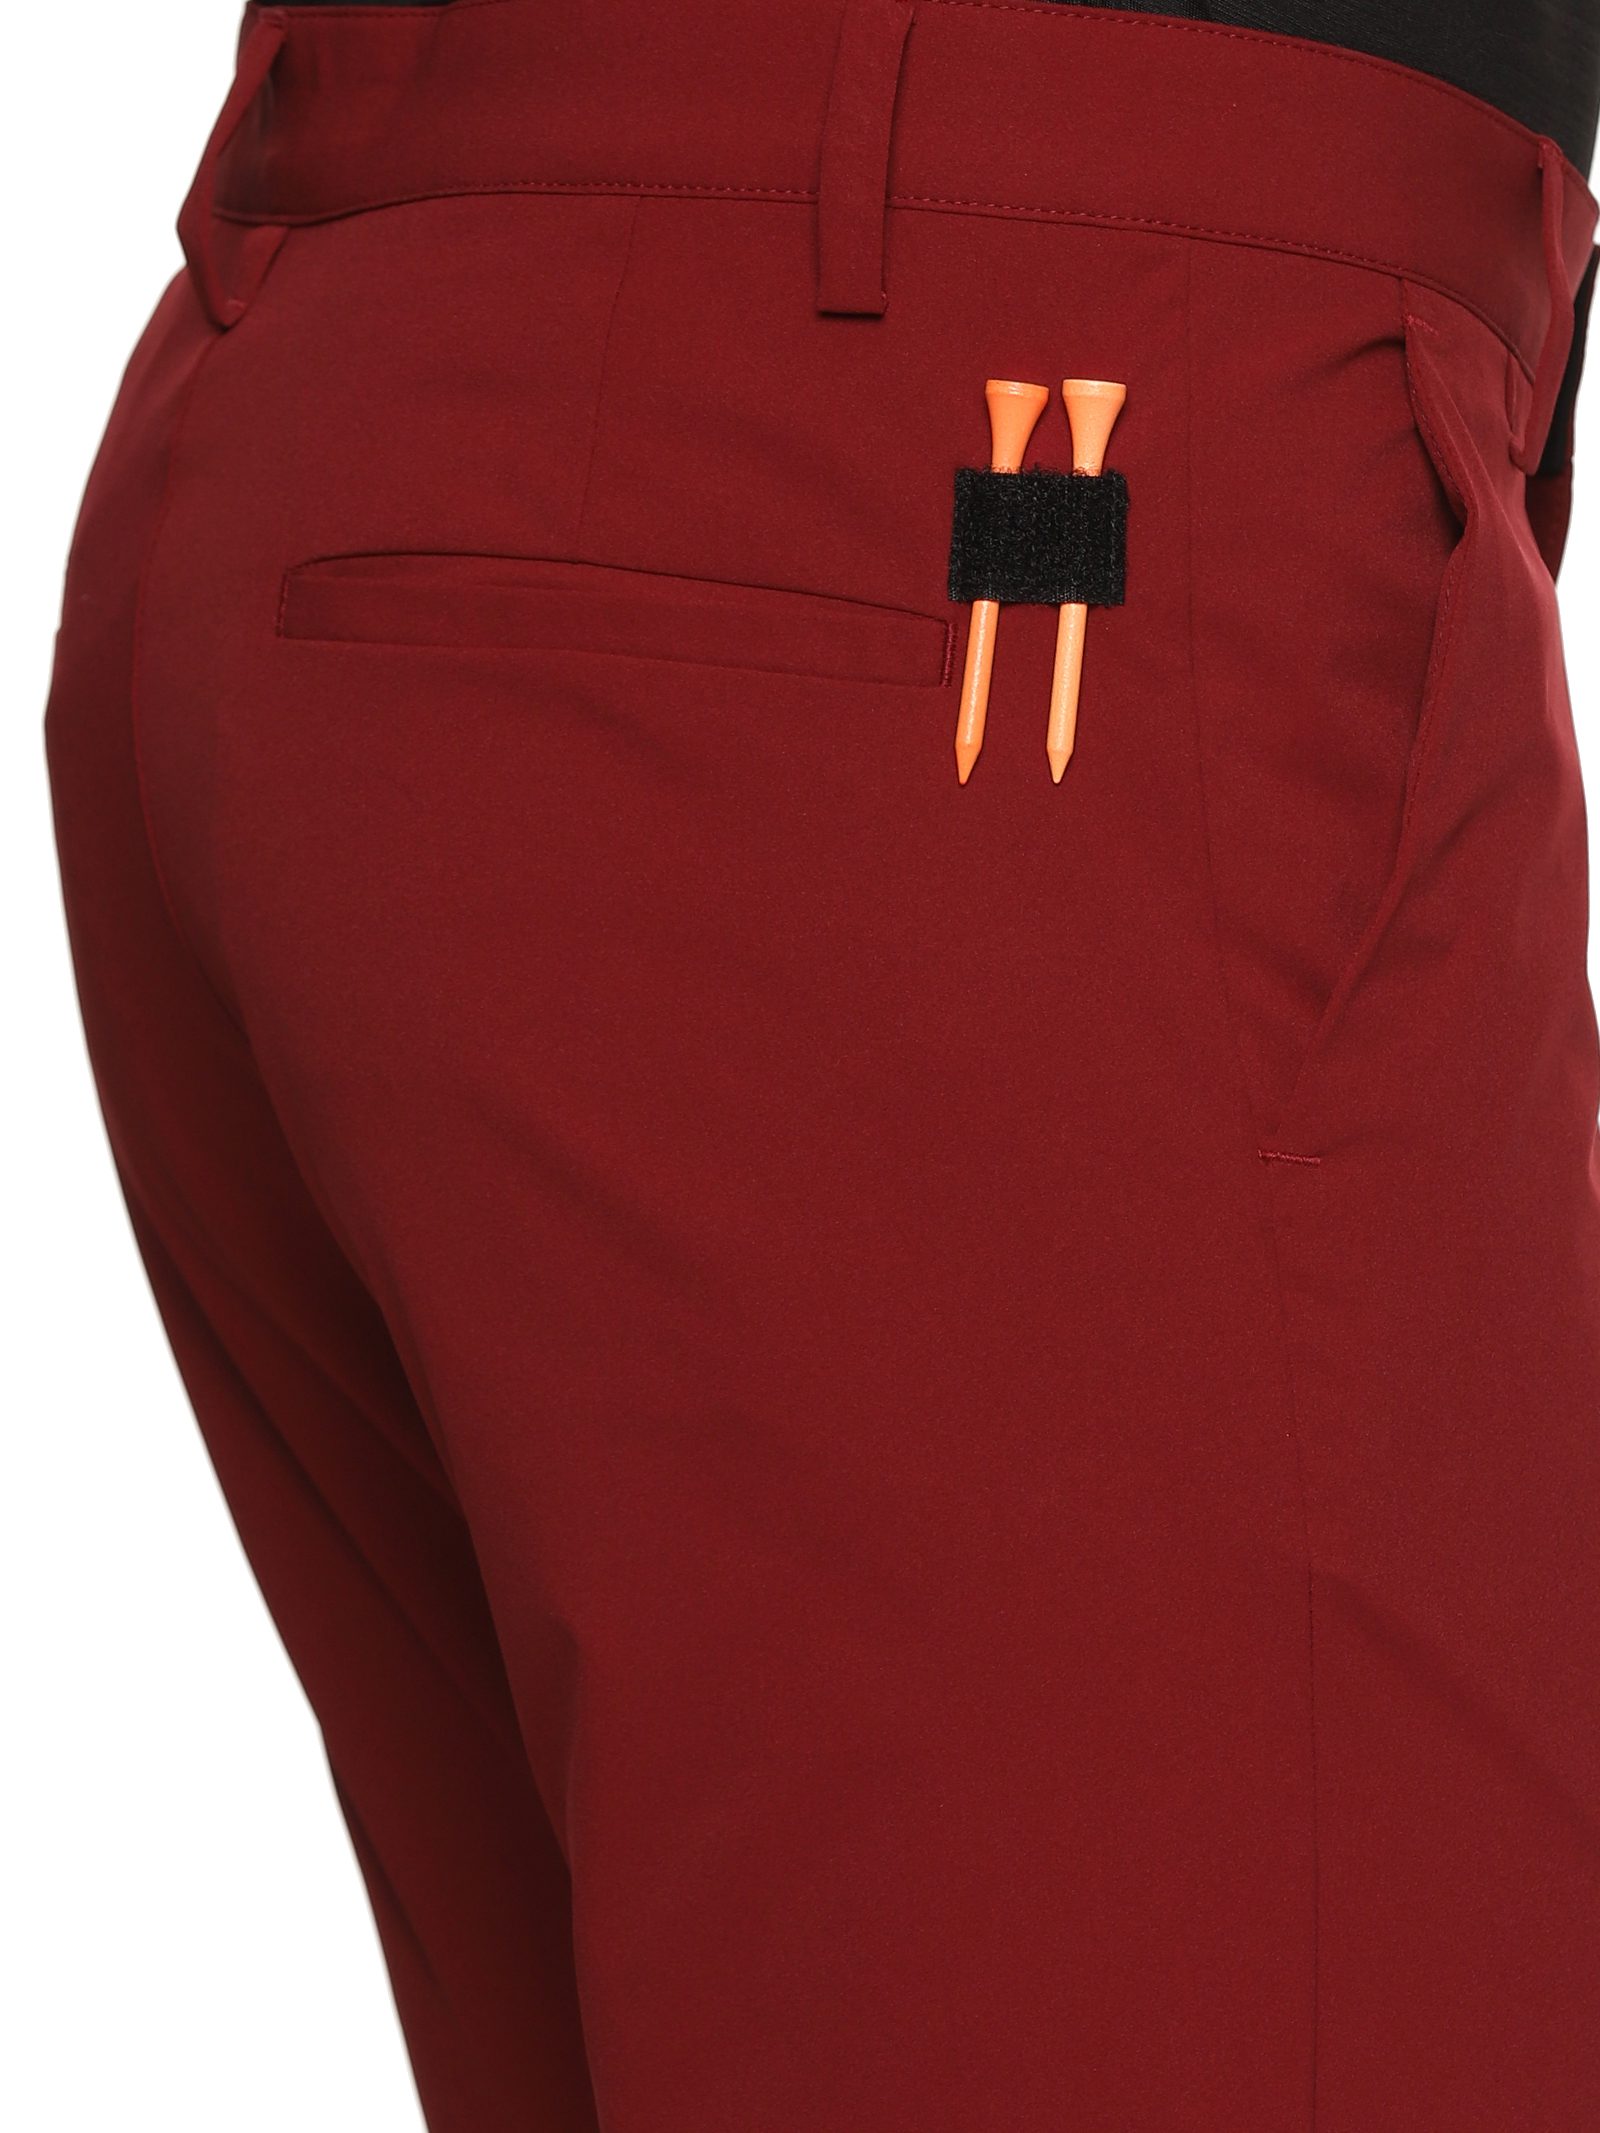 Clubhouse Stay Dry Golf Trousers- Asiansports.in| 9903072000